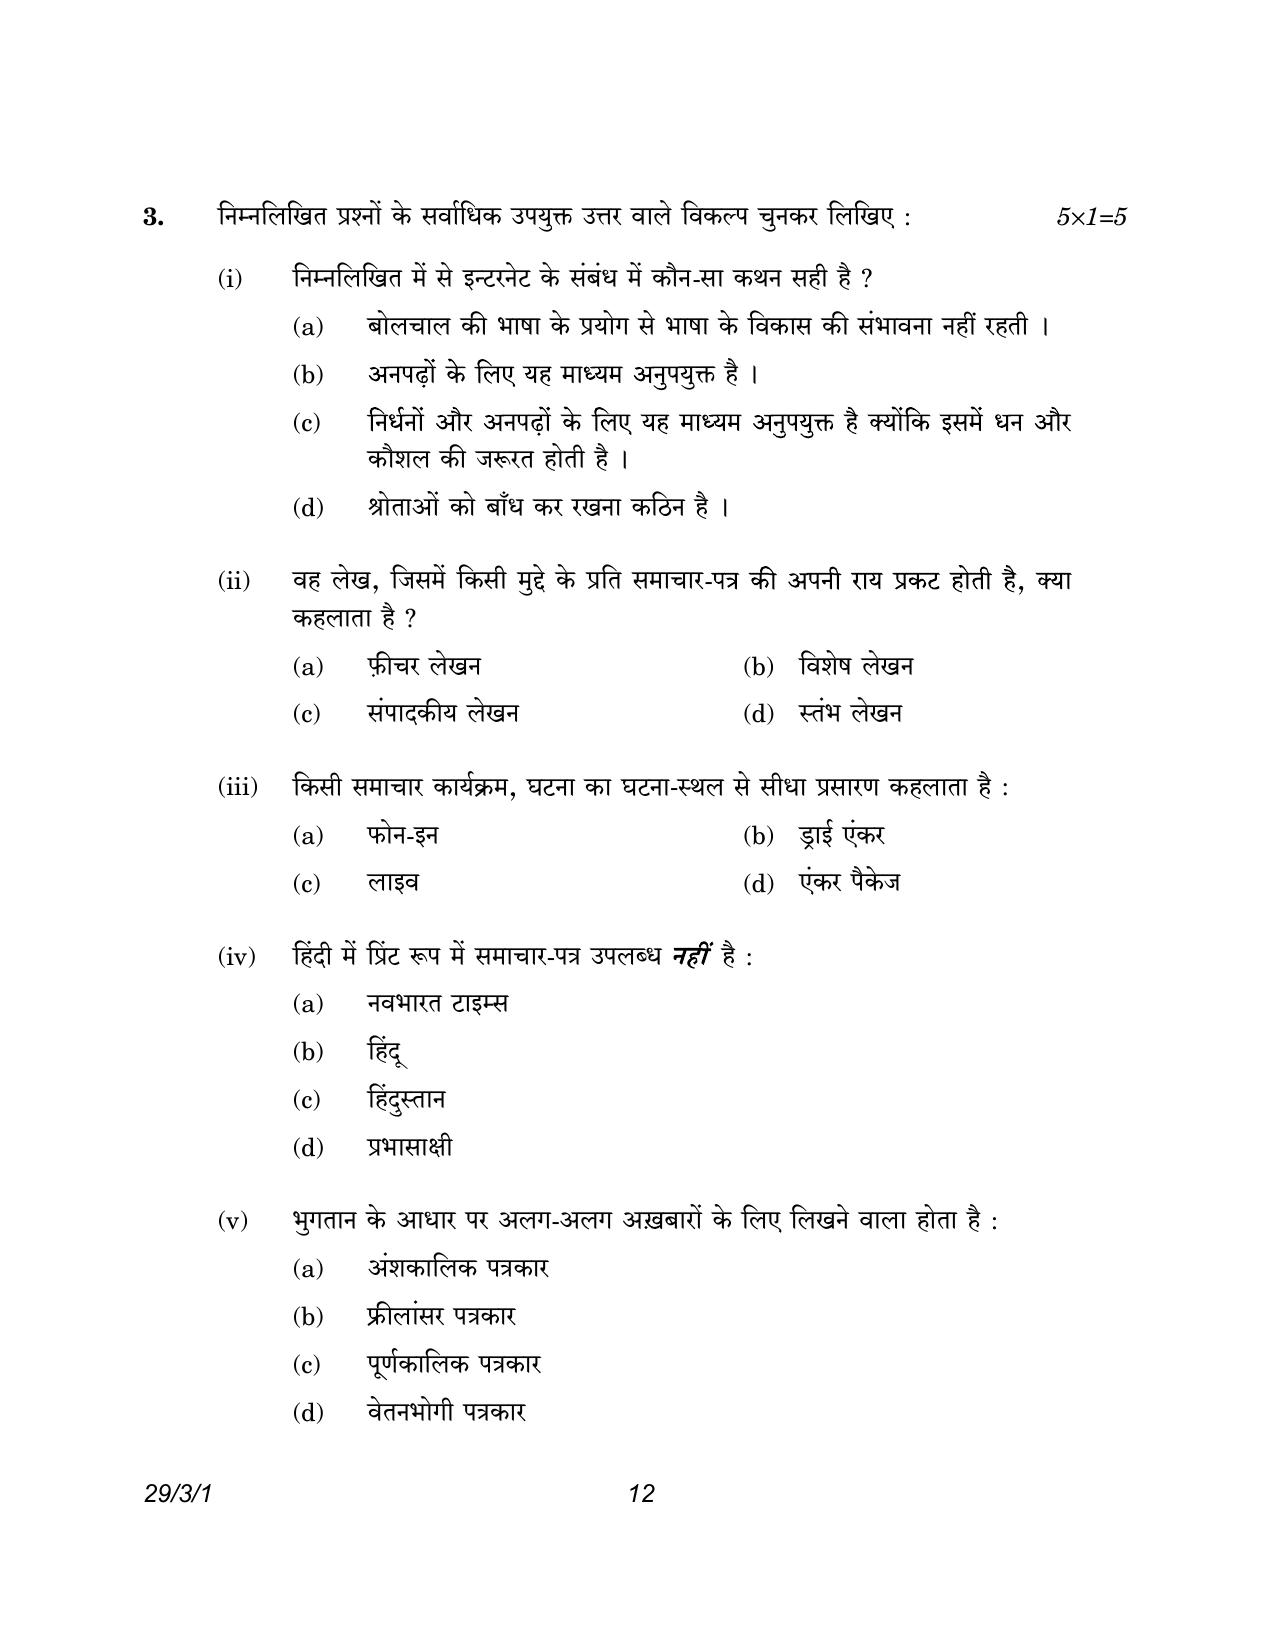 CBSE Class 12 29-3-1 Hindi Elective 2023 Question Paper - Page 12